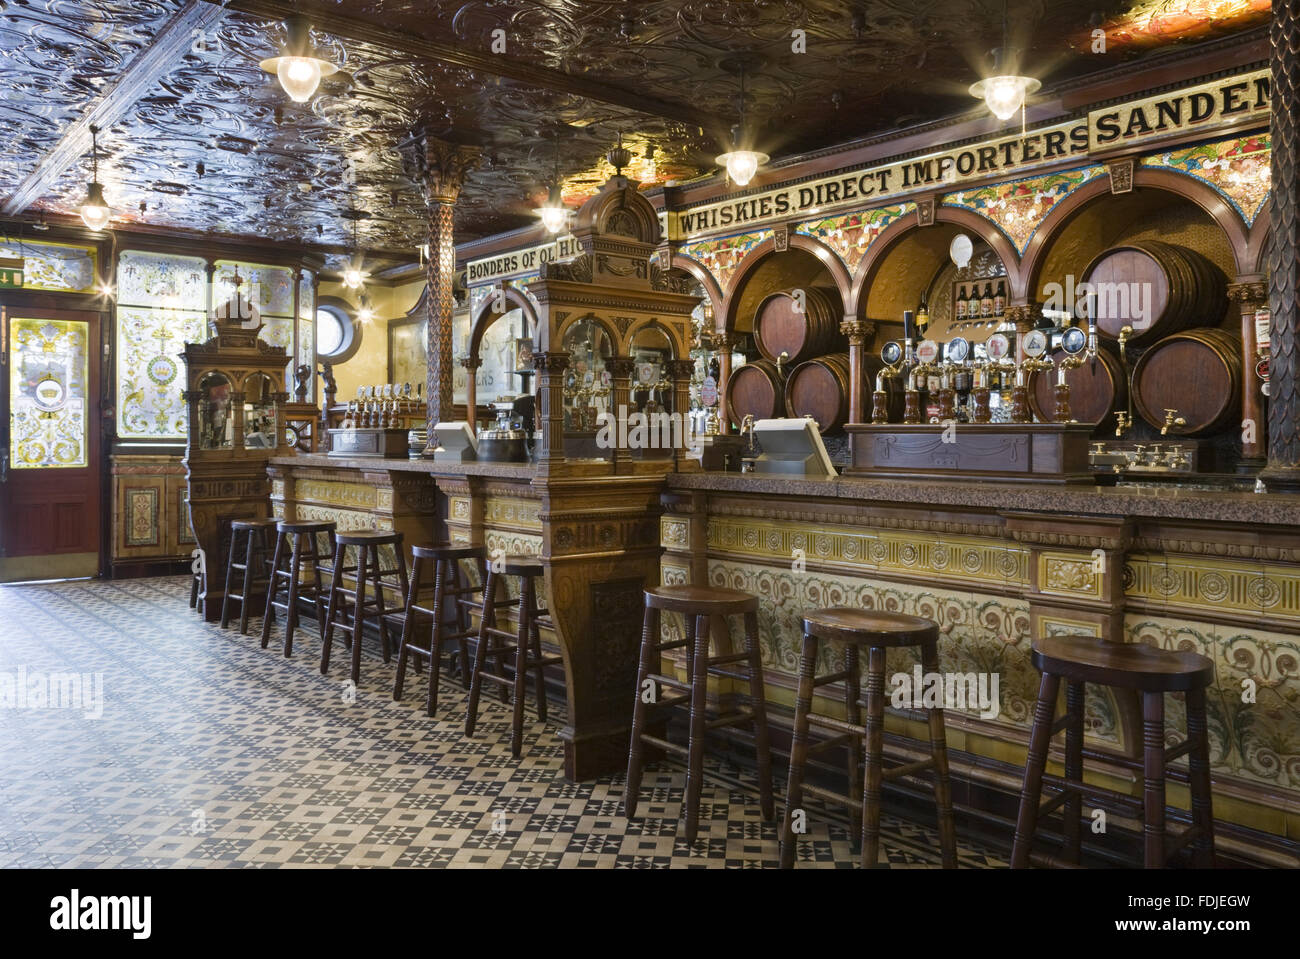 A view inside The Crown Bar, Great Victoria Street, Belfast. Formerly known as the Crown Liquor Saloon, the pub building dates from 1826 but the wonderful late Victorian craftsmanship of the tiling, glass and woodwork undertaken by Italian workers dates f Stock Photo